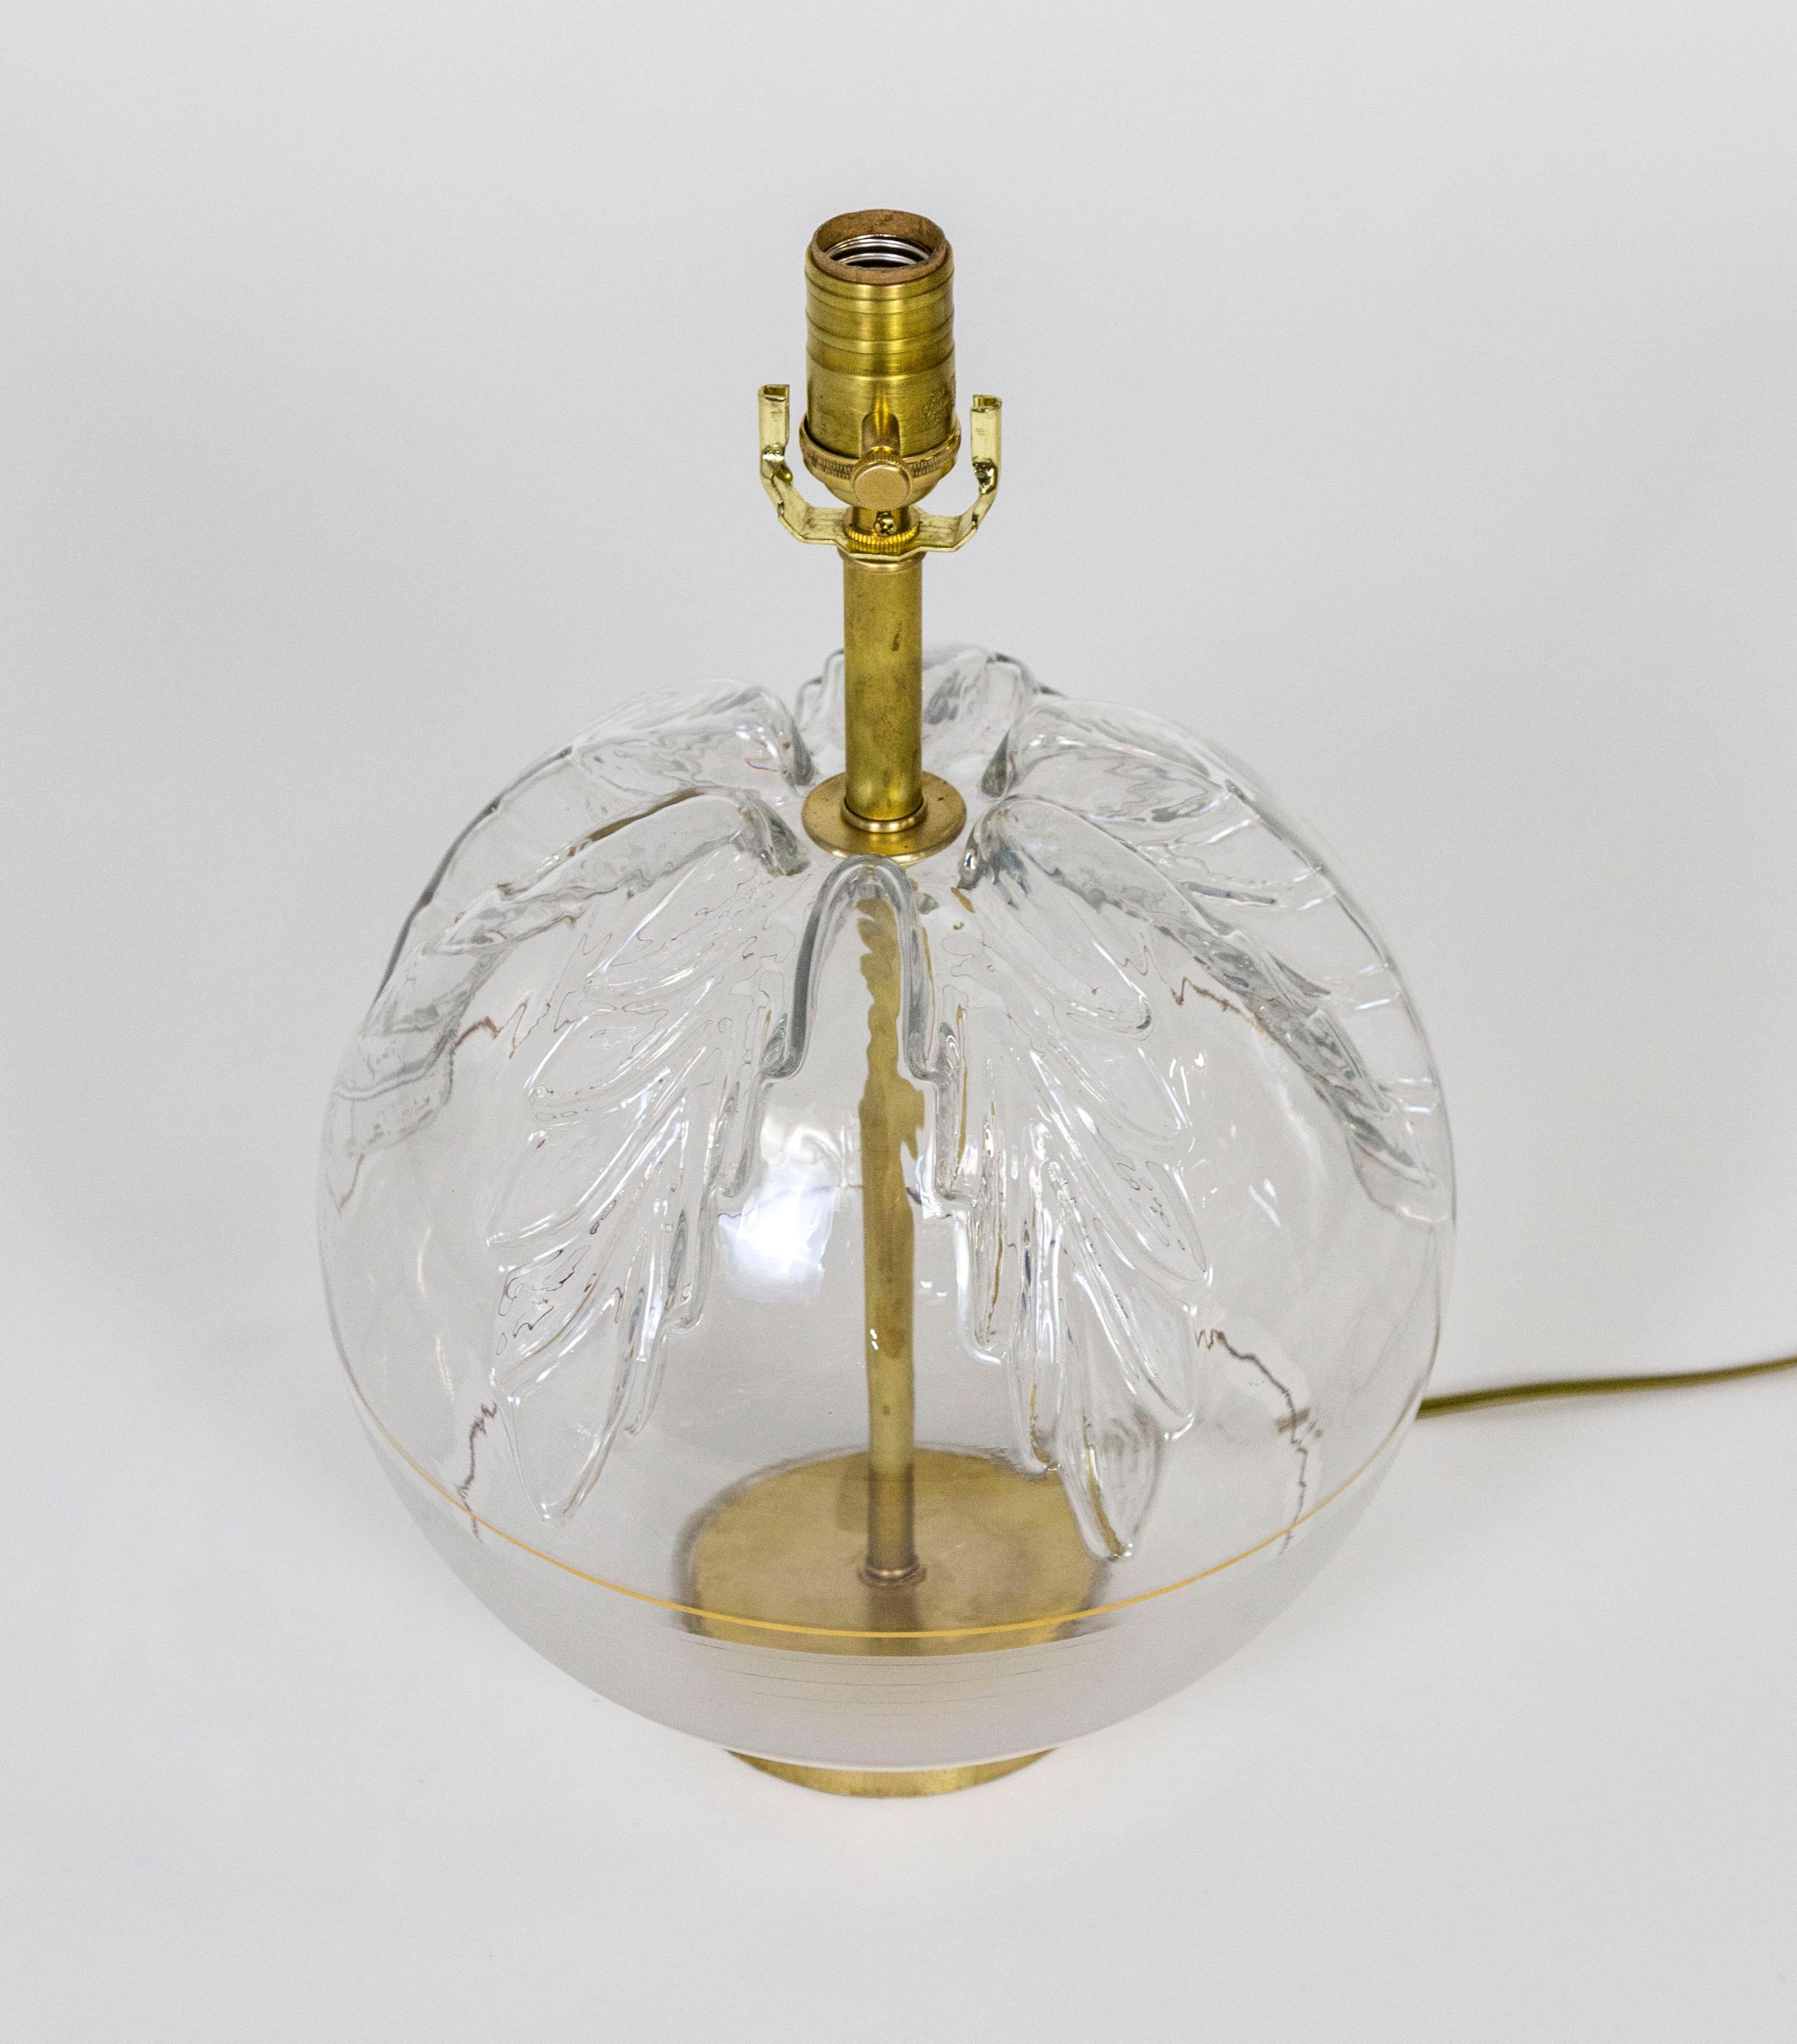 A lamp with brass neck and base visible through the clear glass body in the form of a sphere with large pressed leaf designs on top, a gold pinstripe, and frosted bottom half. Newly wired with a dimmer switch on the socket. 12